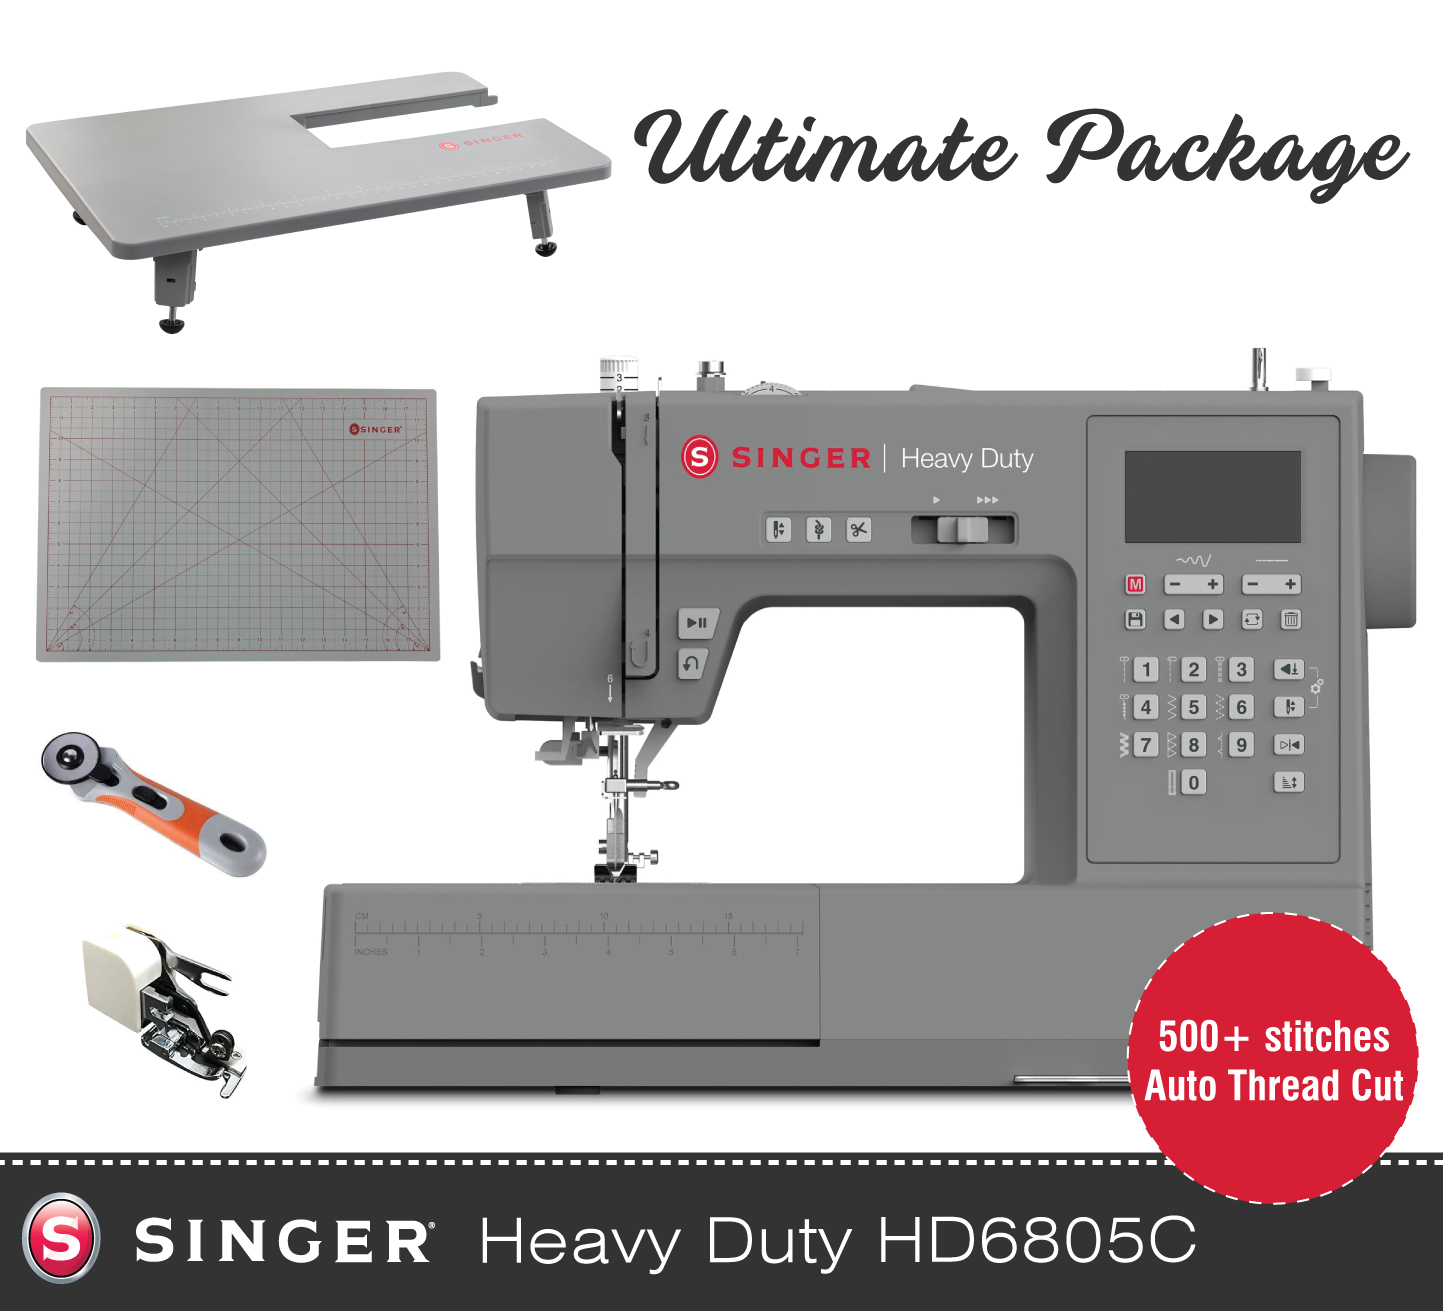 Singer Heavy Duty 6705C Sewing Machine Review